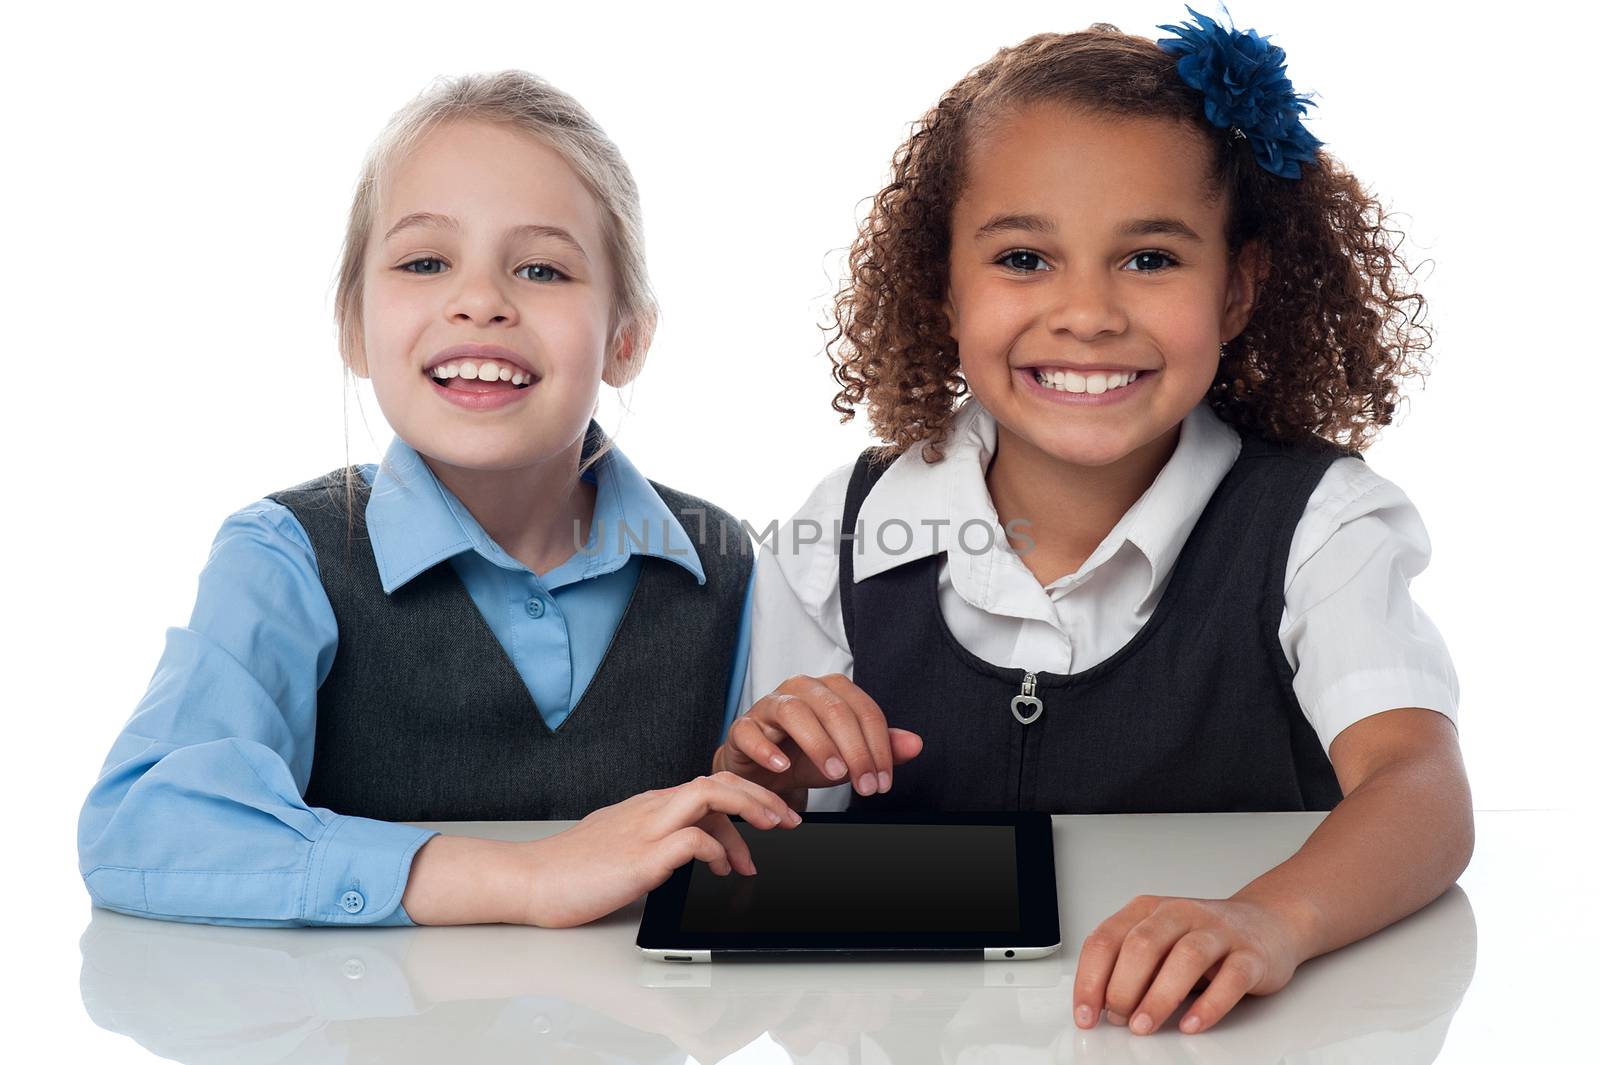 Smiling school girls playing on touchpad by stockyimages